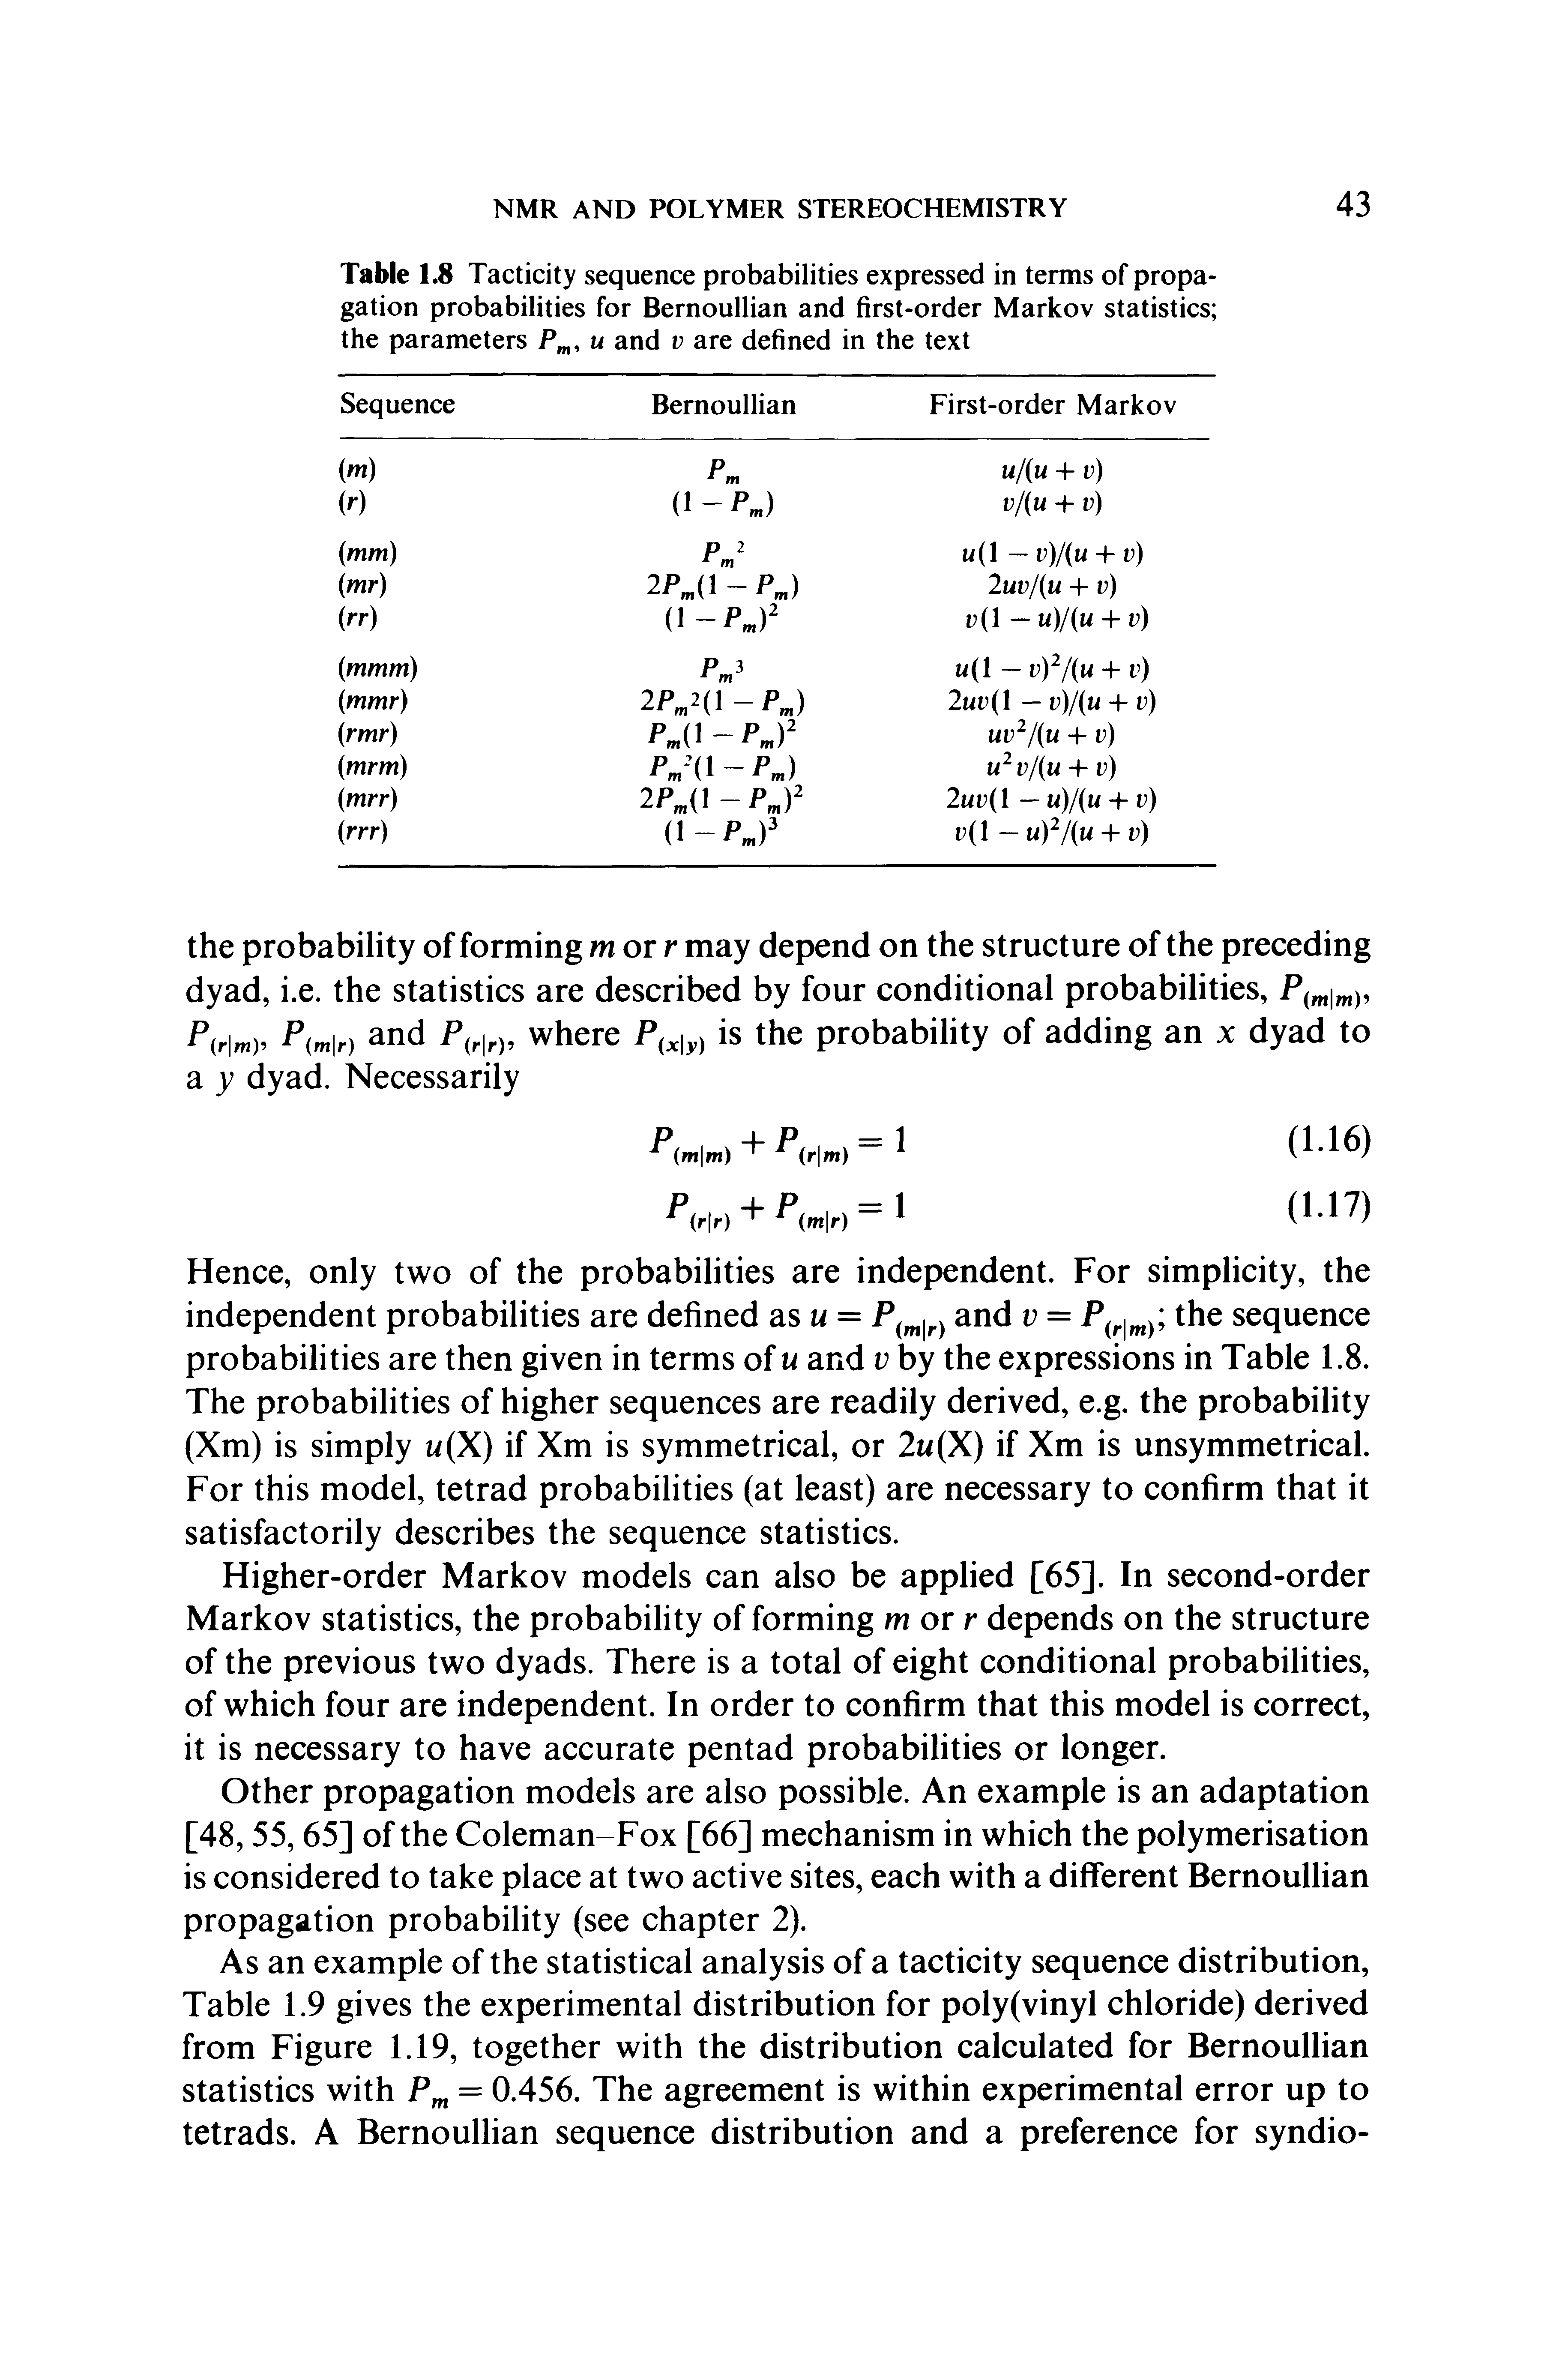 Table 1.8 Tacticity sequence probabilities expressed in terms of propagation probabilities for Bernoullian and first-order Markov statistics the parameters u and v are defined in the text...